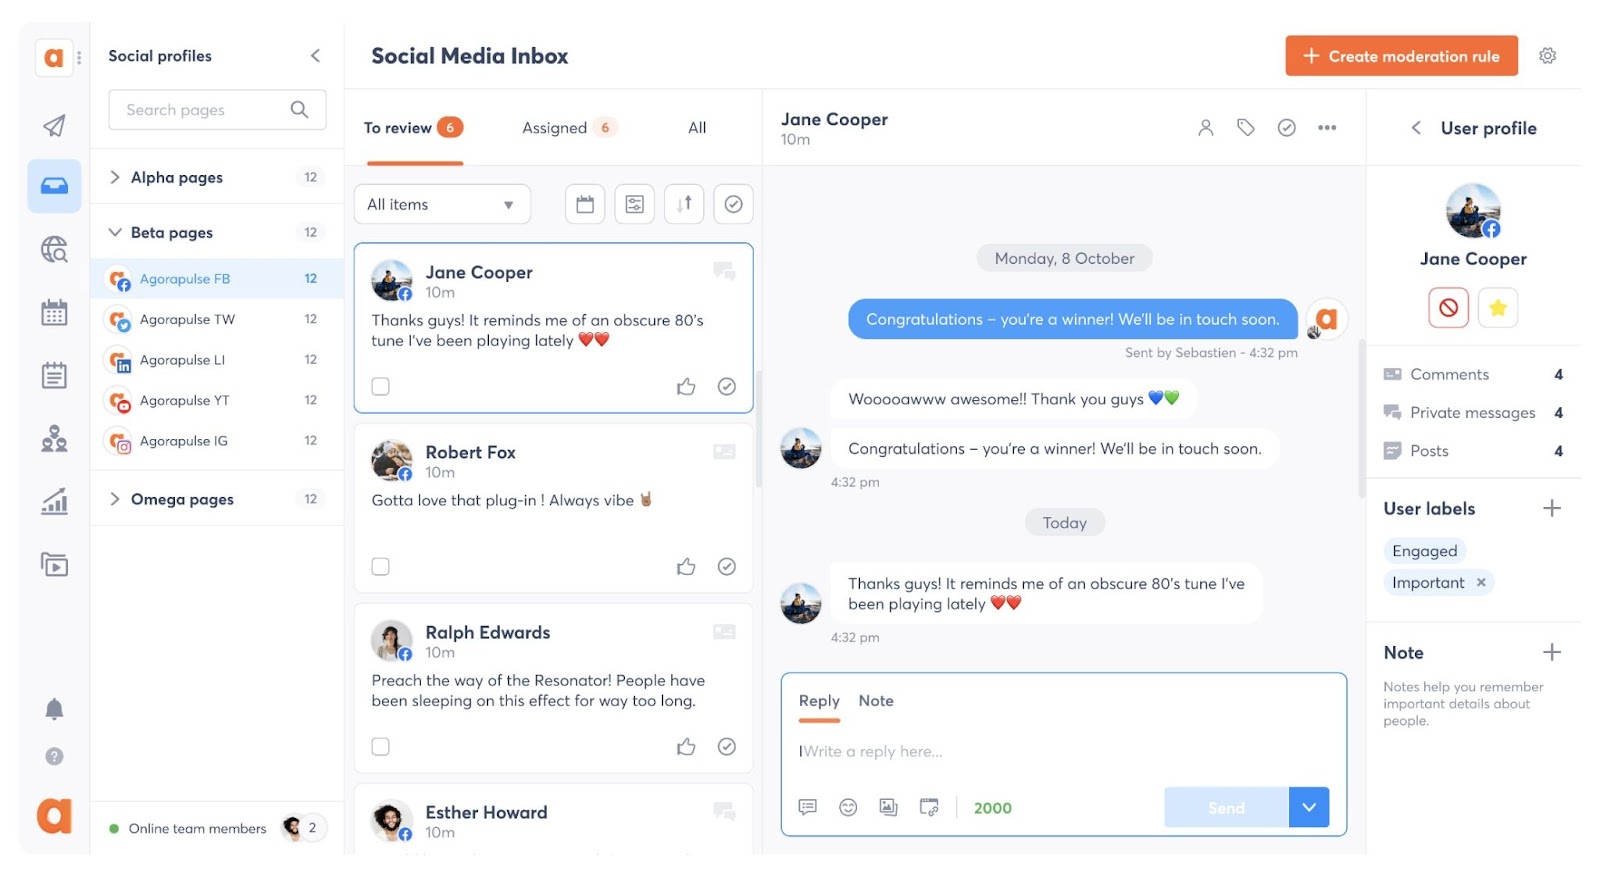 Social media inbox in Agorapulse showing connected channels, messages, message threads and user profile information.